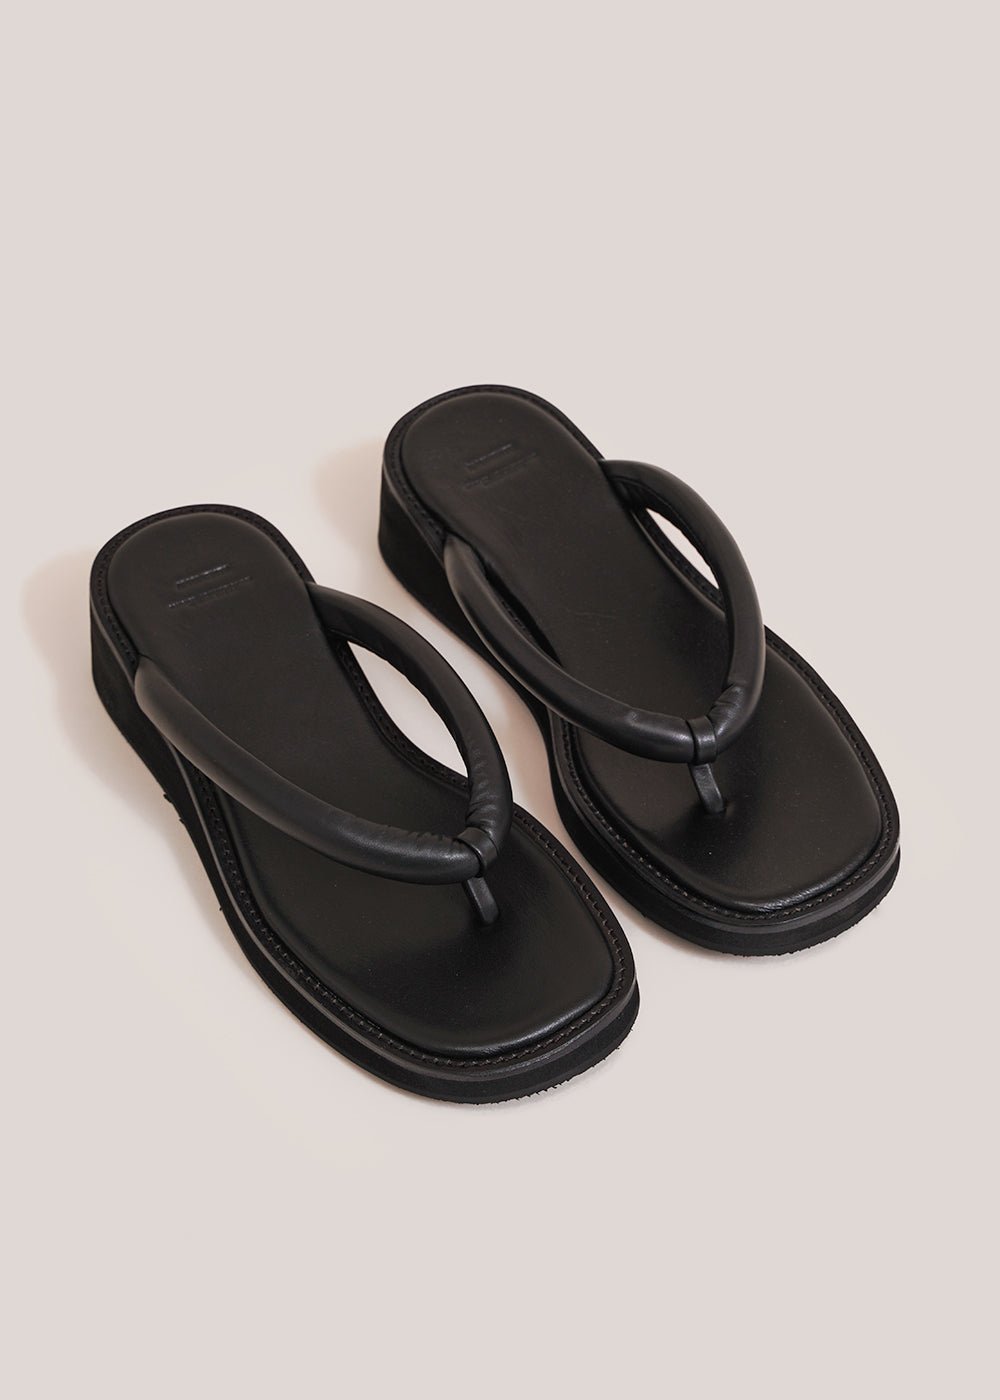 Padded Strap Flip Flop in Black by AMOMENTO – New Classics Studios